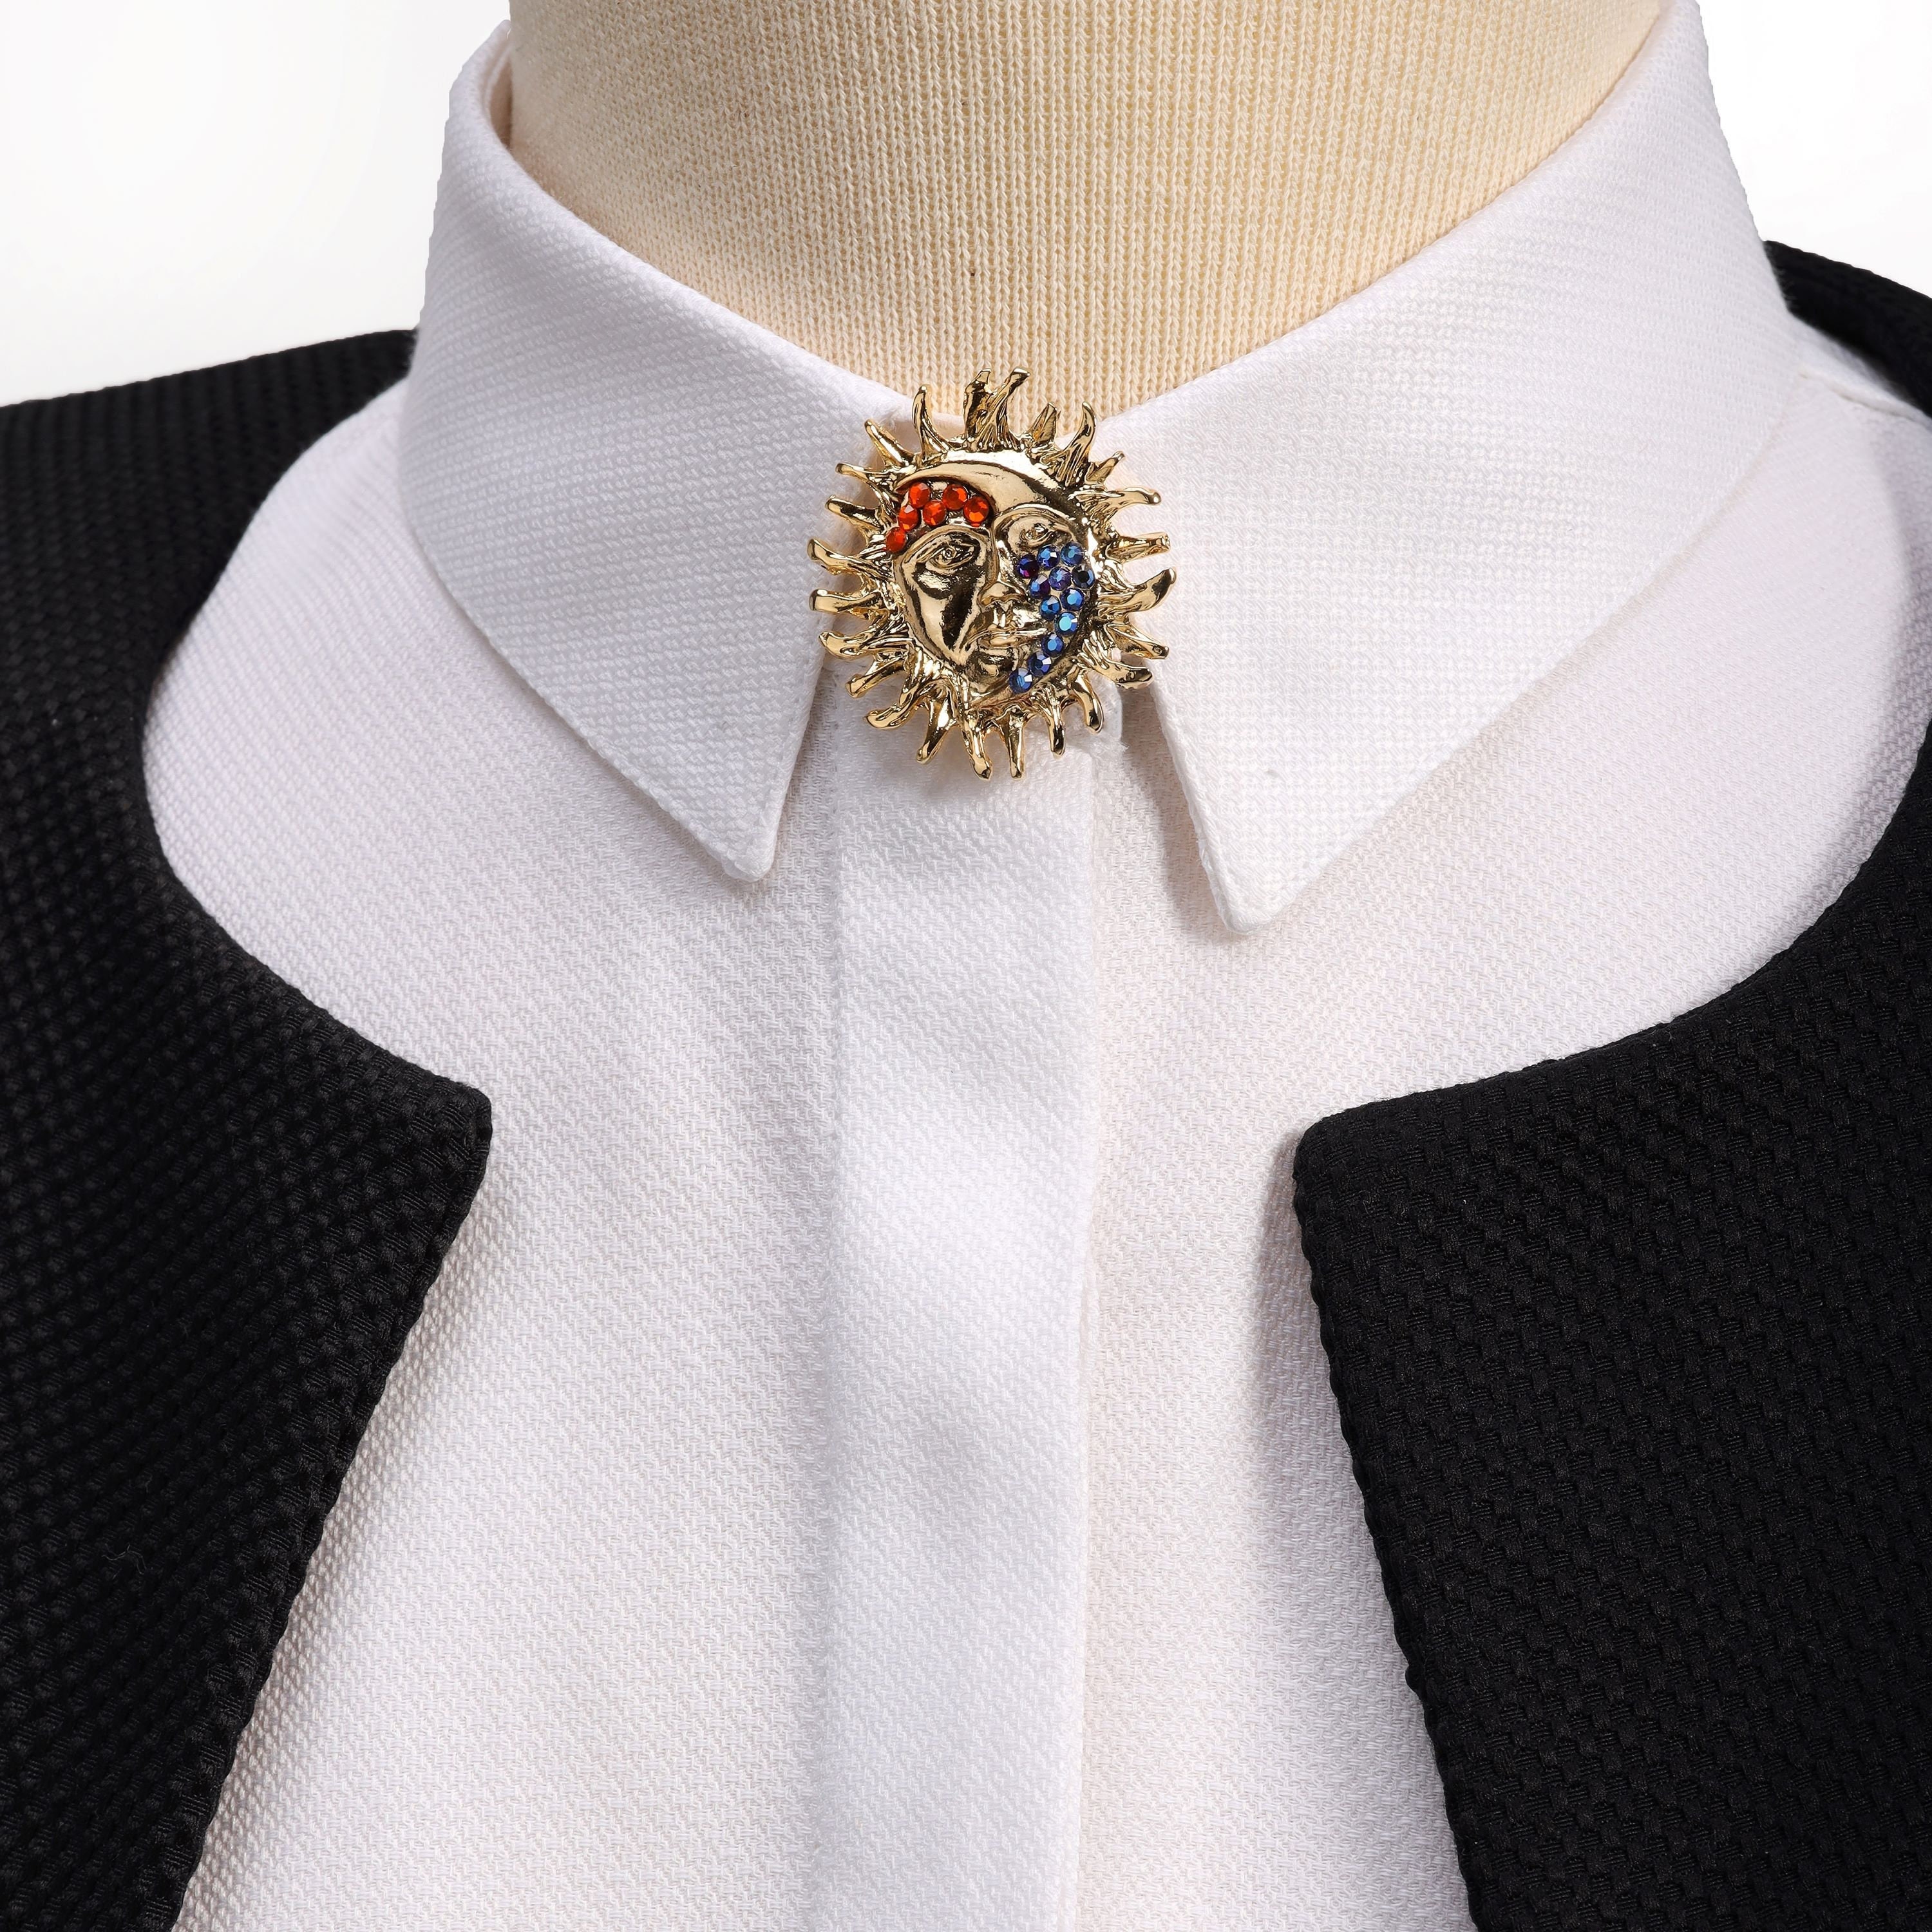 Buy Wholesale China Dress Shirt Brooch Clips For Women 4 Pieces